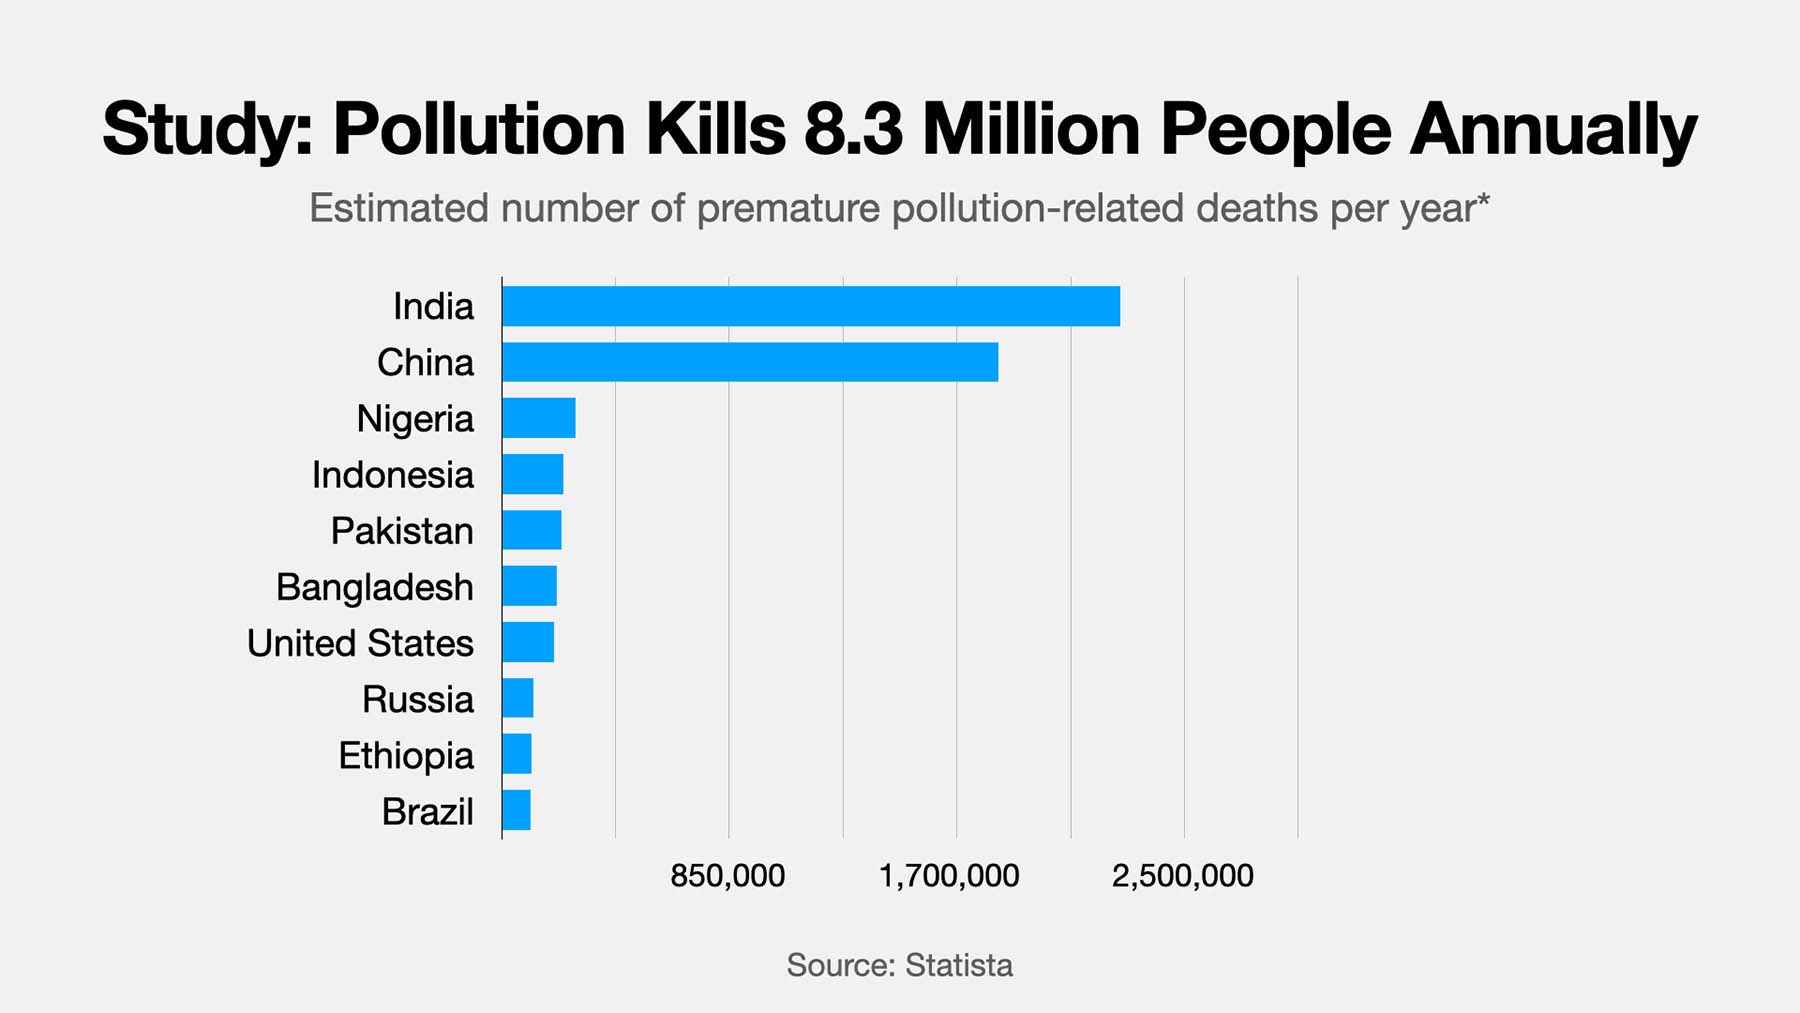 Annual Deaths Caused by Pollution